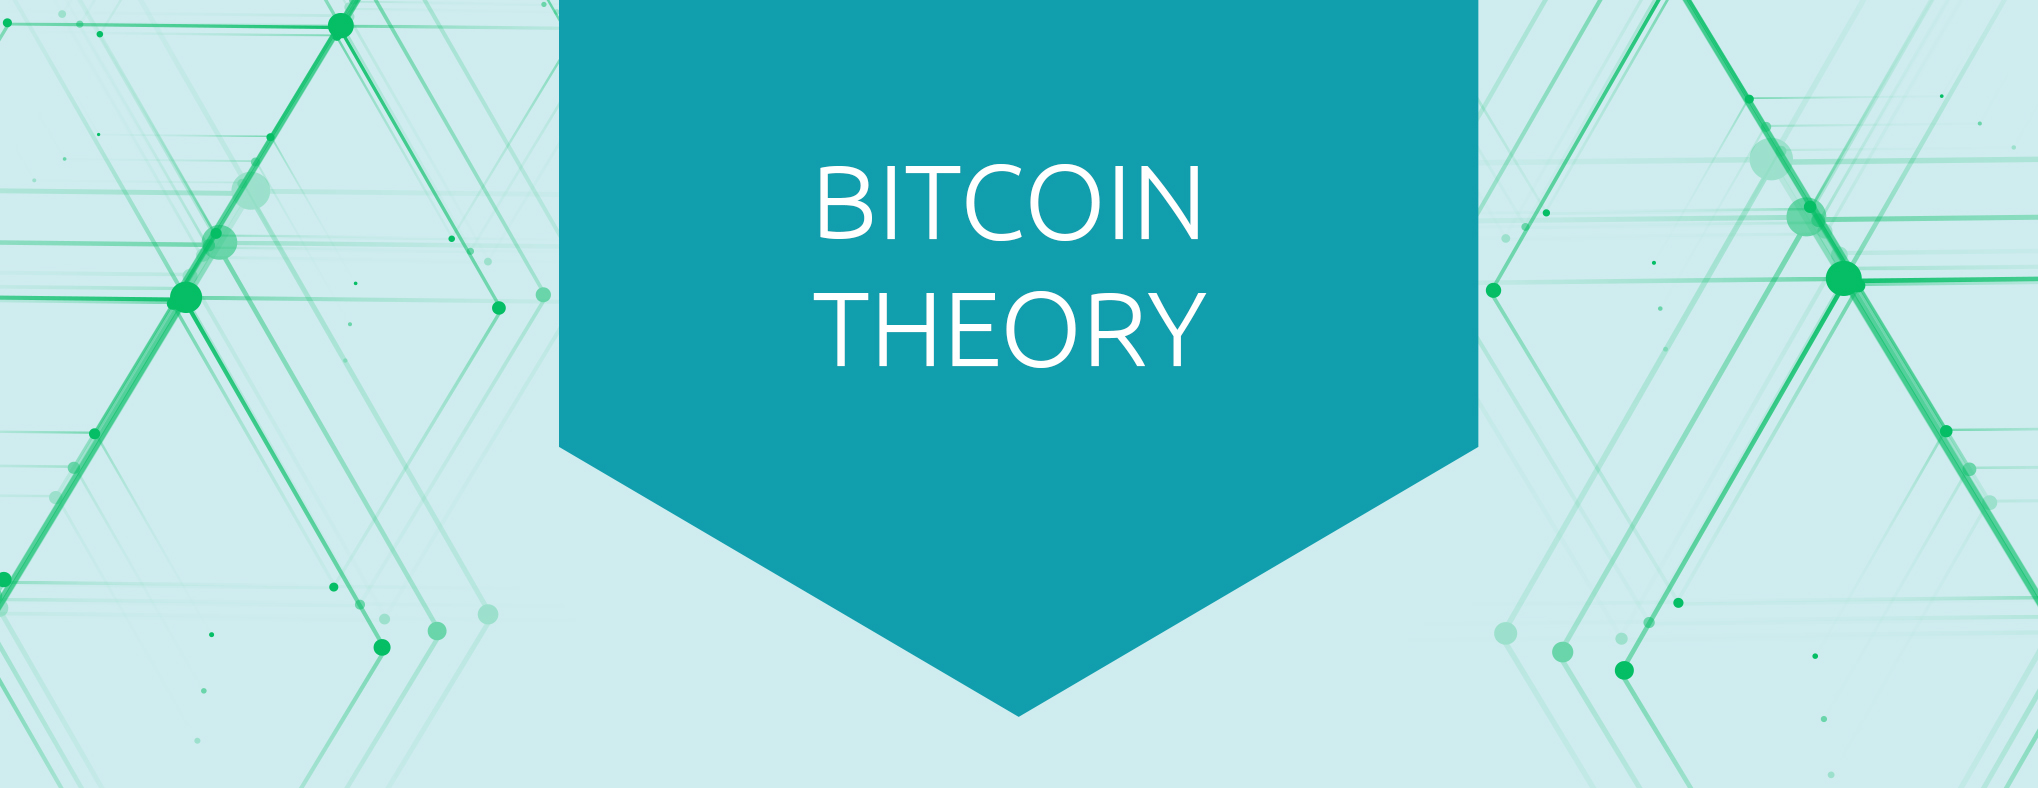 Bitcoin Theory Course Certificate